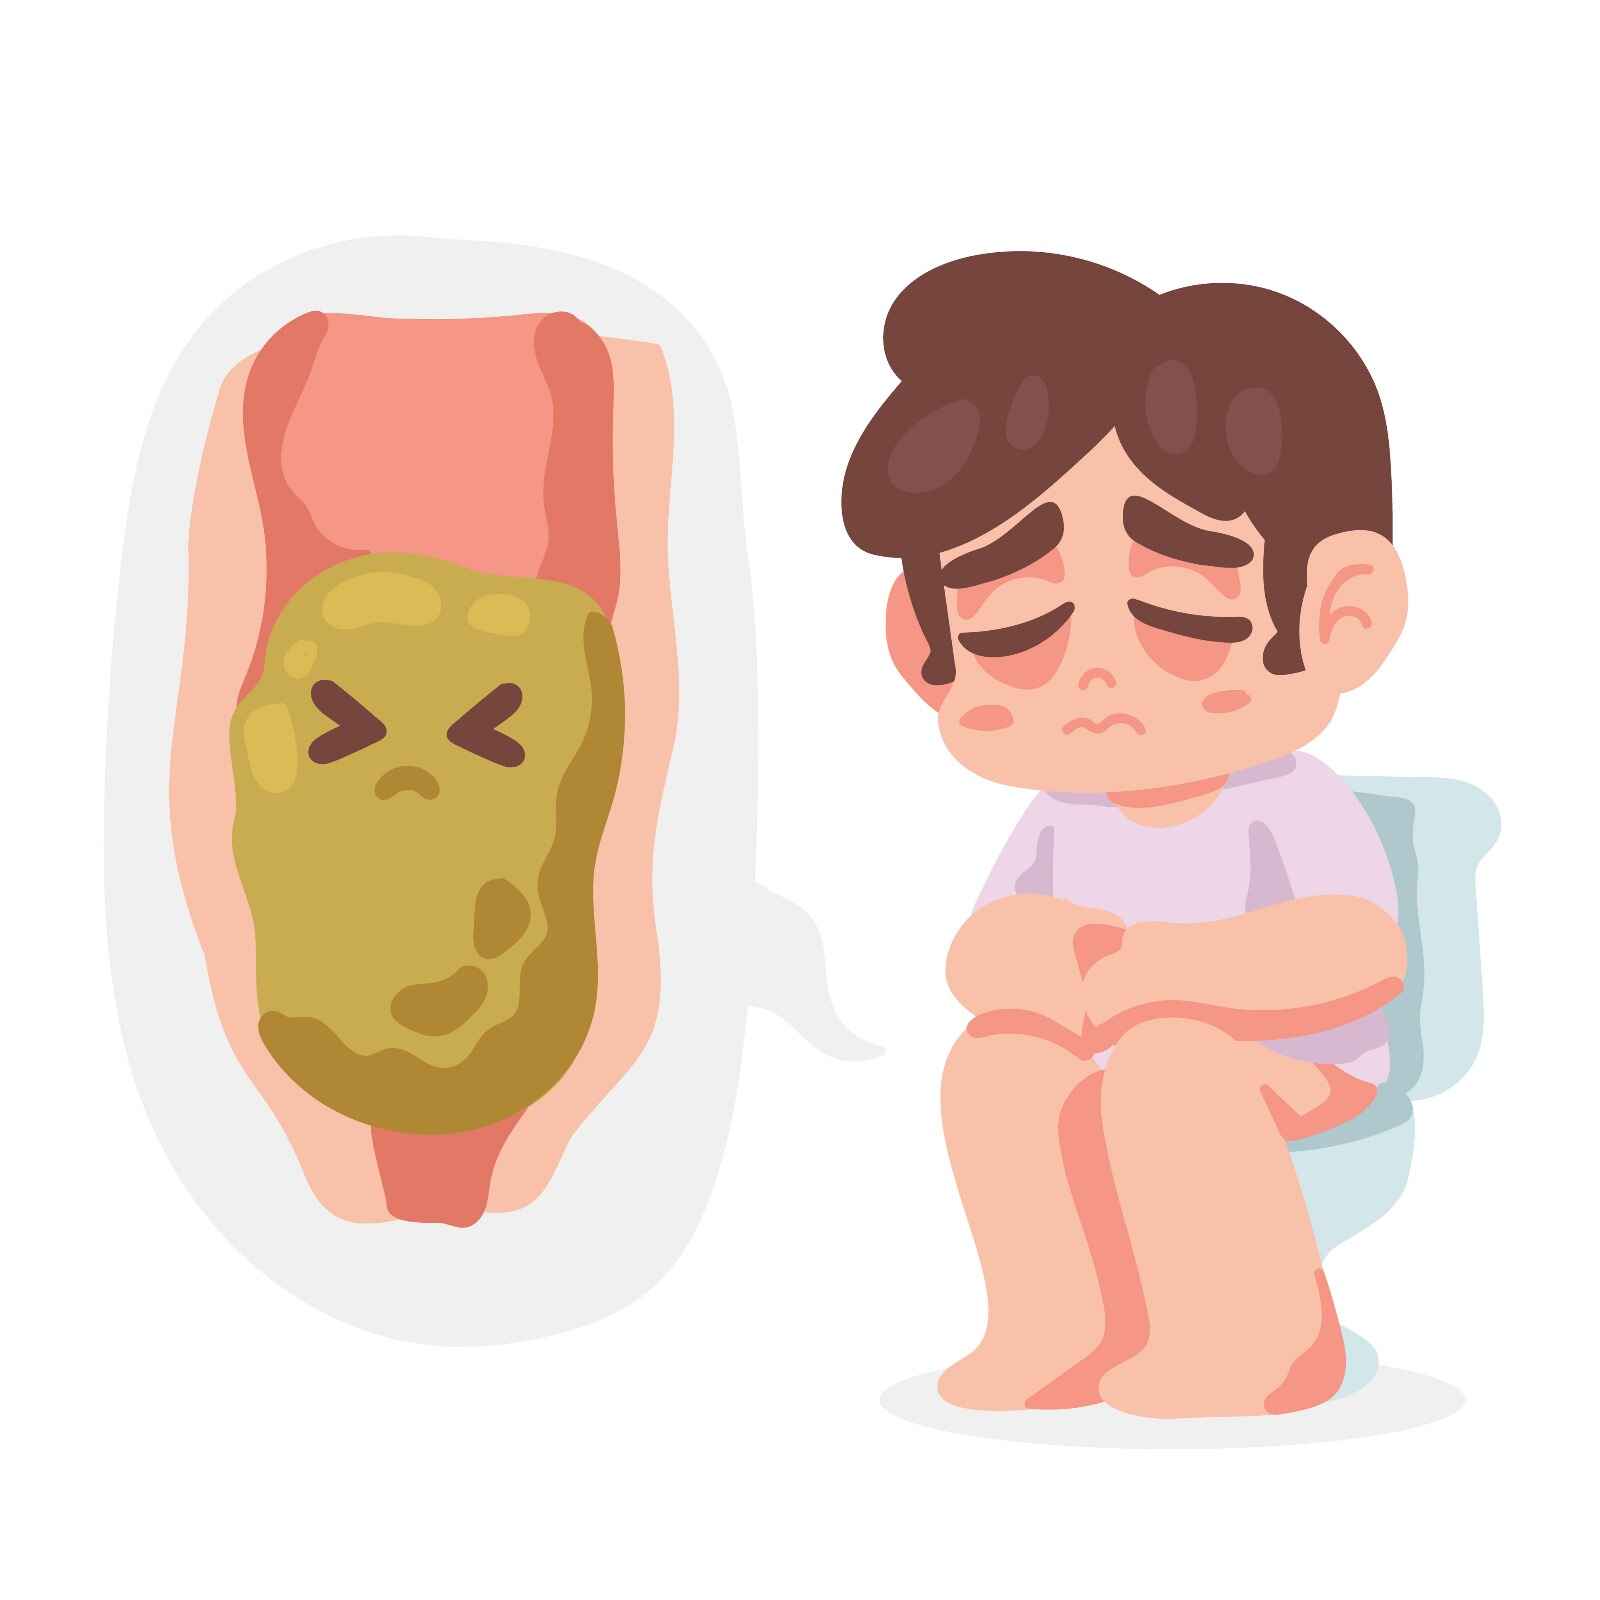 Symptoms of constipation: infrequent bowel movements, hard stools, straining, abdominal pain.